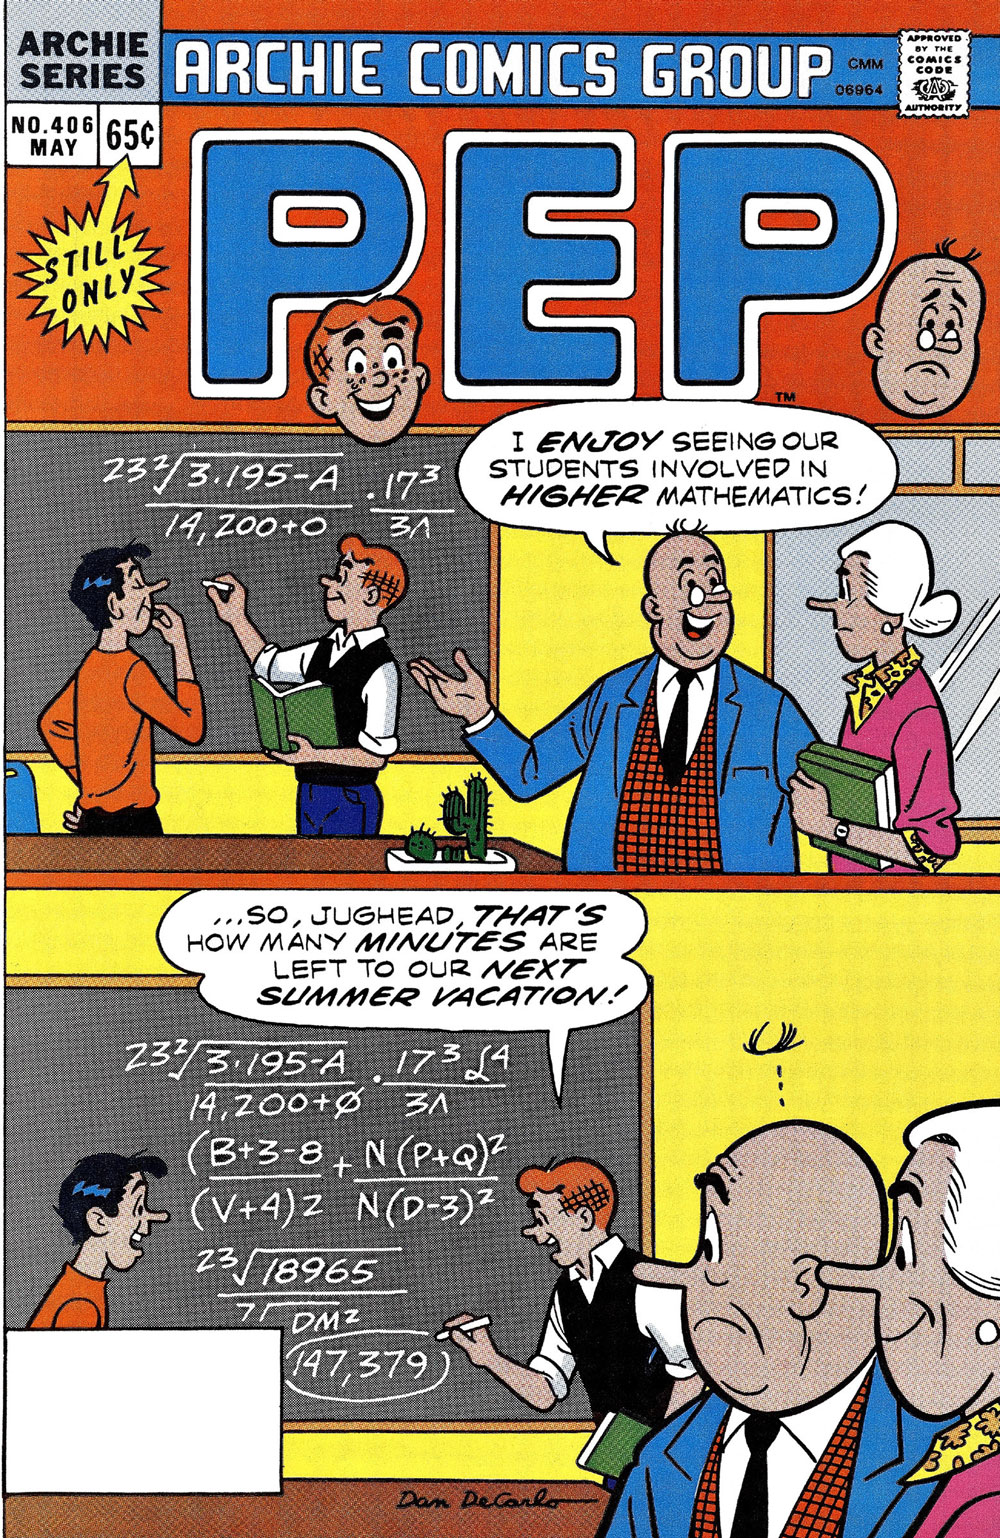 Archie and Jughead work out a math equation at the blackboard while Mr. Weatherbee and Ms. Grundy look on. Weatherbee says he enjoys seeing them engaged with math. In the next panel, Archie says it's how he's calculating how many minutes are left until summer vacation.